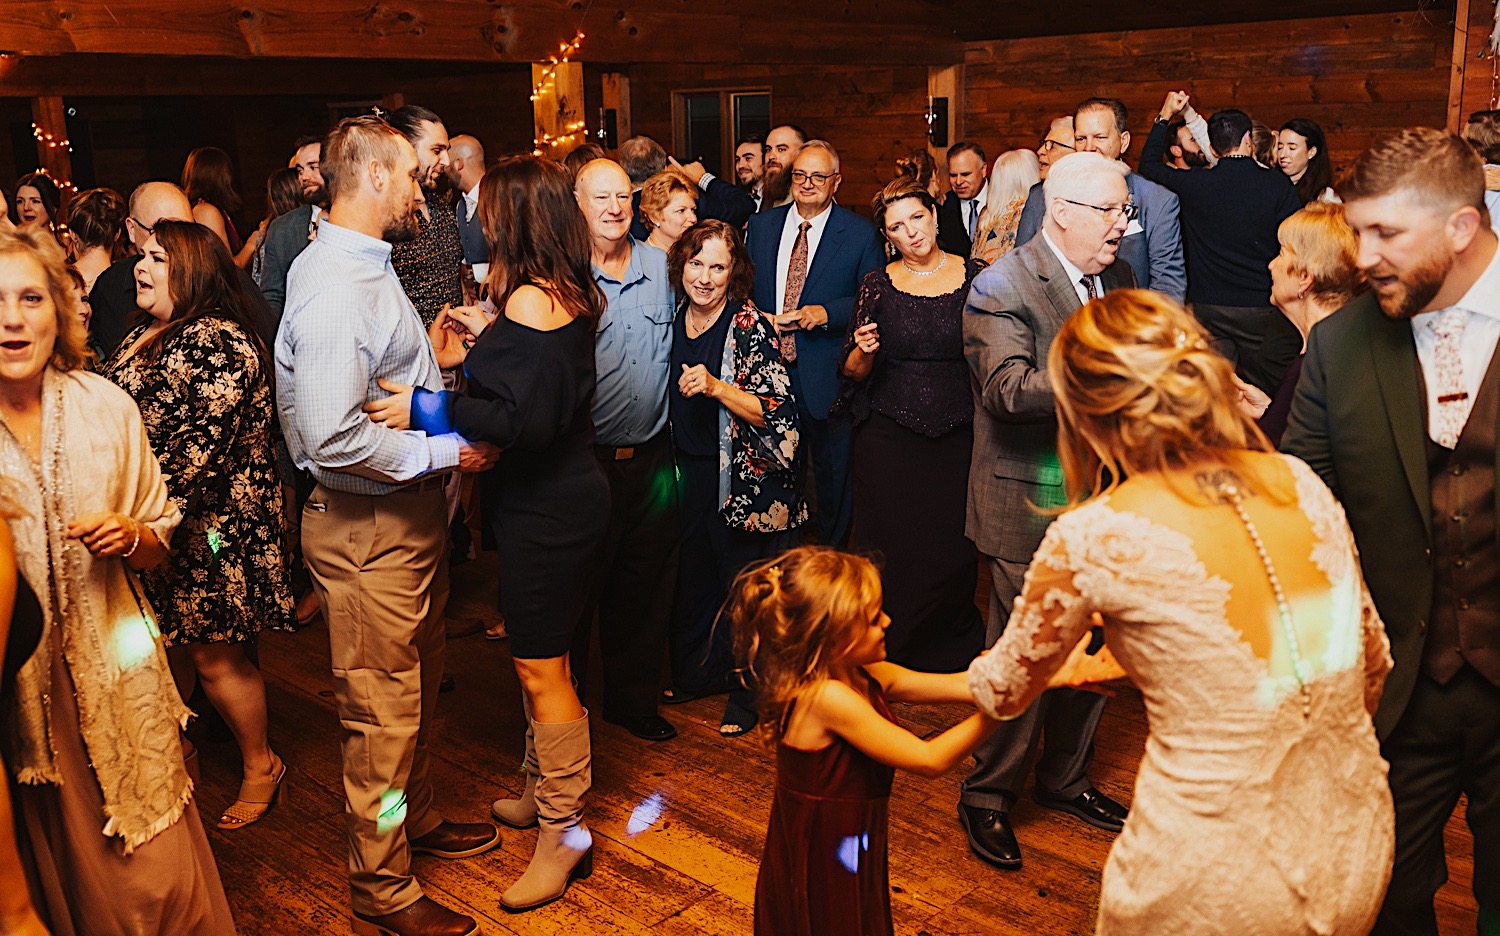 Guests of an indoor wedding reception at Lake Bomoseen Lodge in Vermont all dance and mingle together